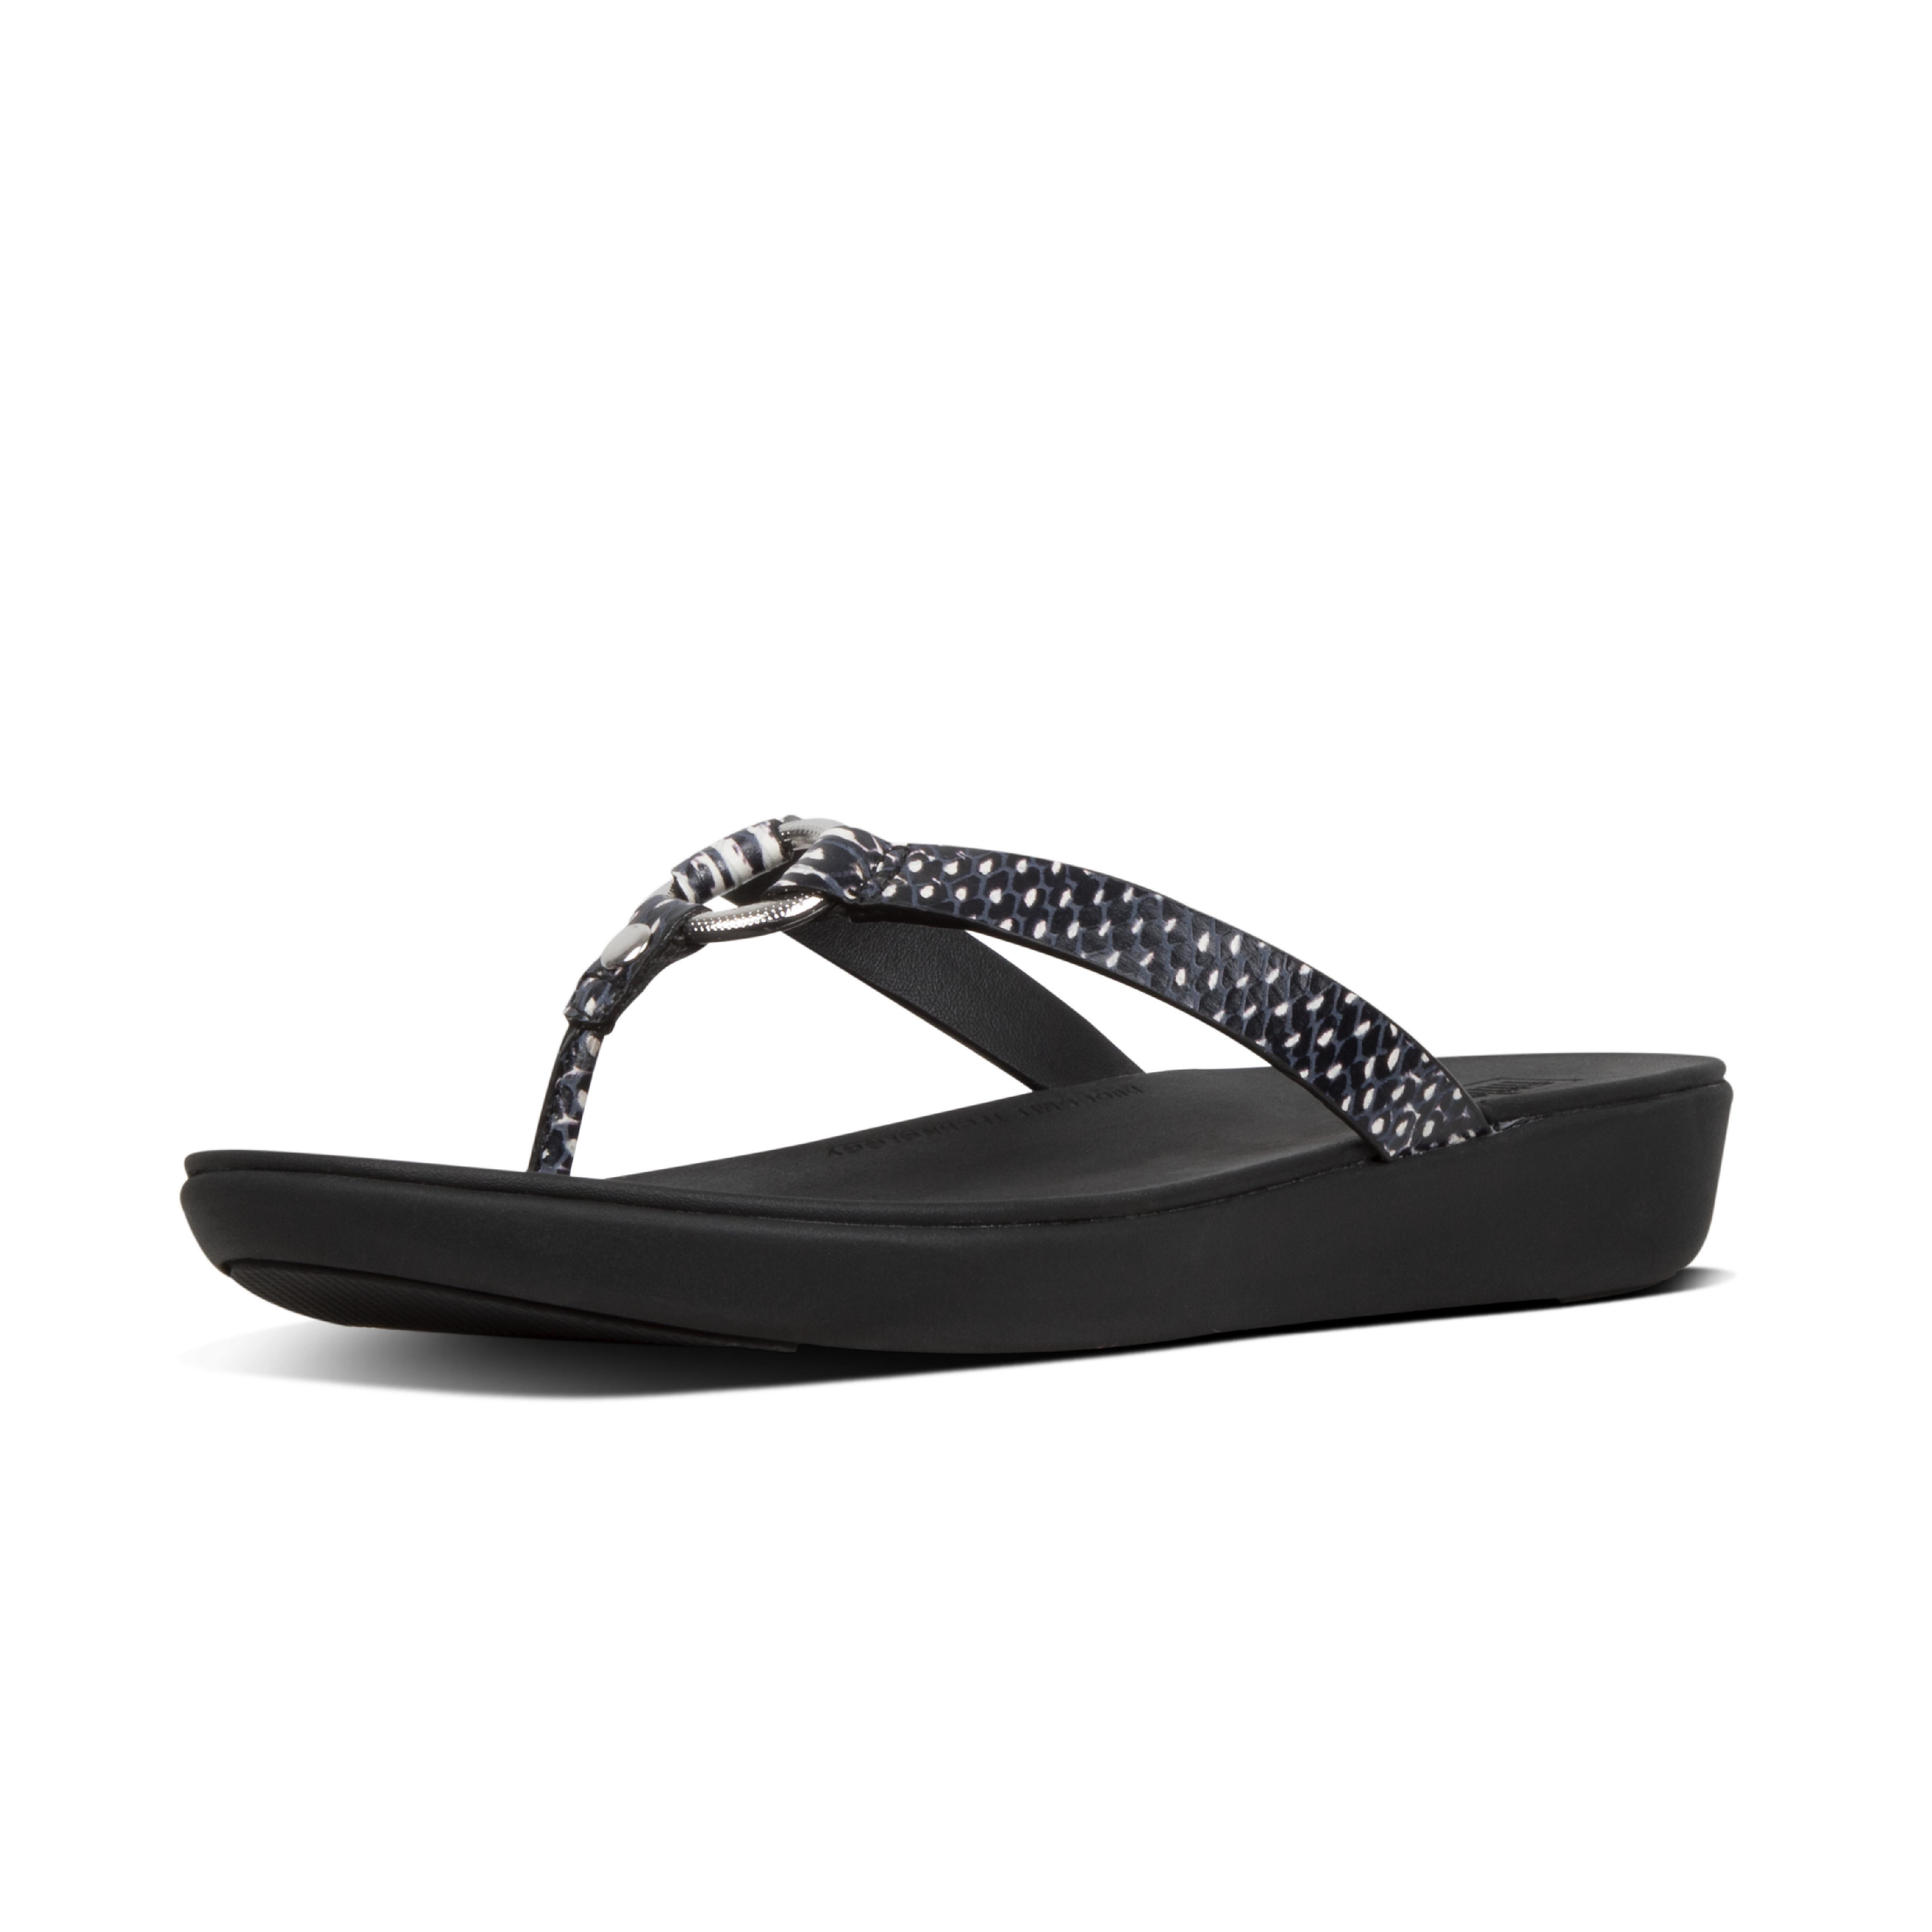 Fitflop Leather Hoopla in Black Snake 